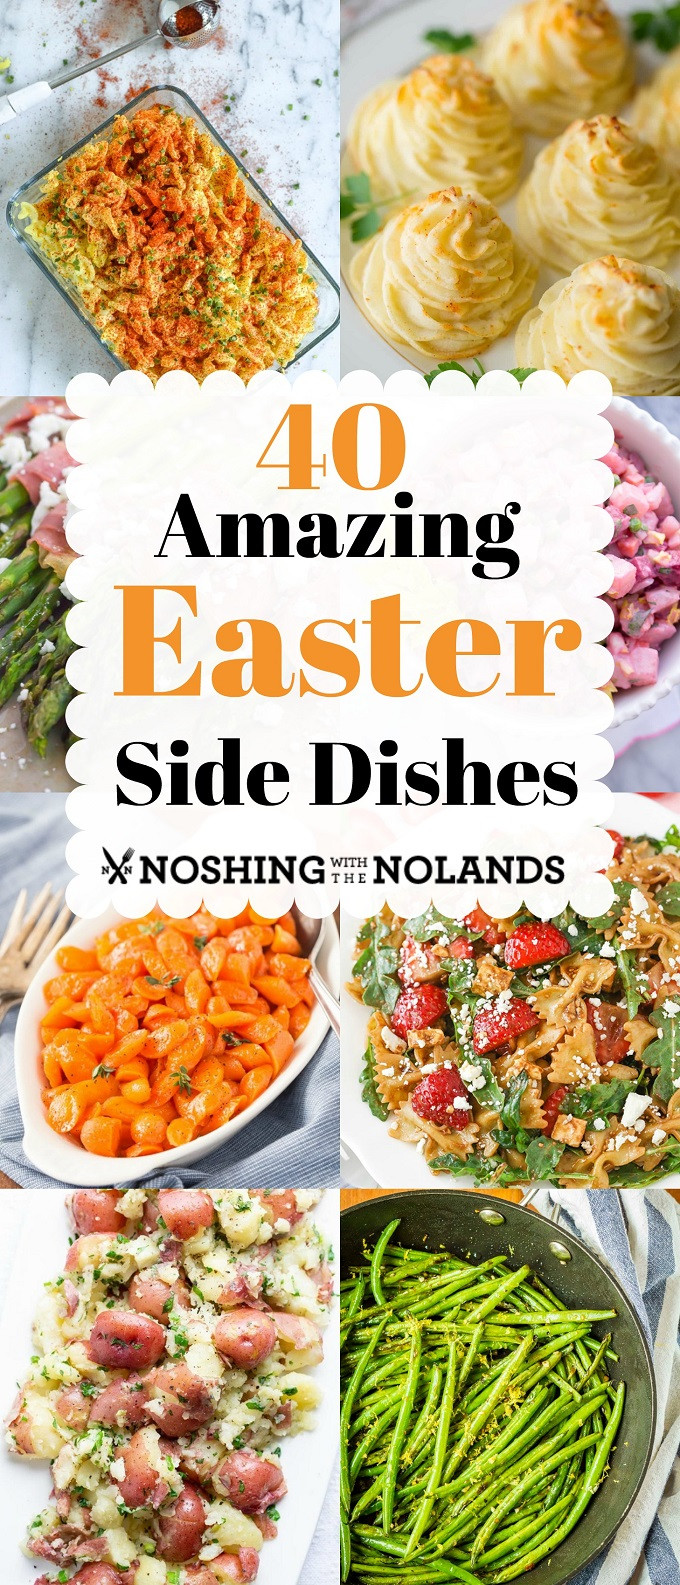 Easter Brunch Side Dishes
 40 Amazing Easter Side Dishes to help make your Easter